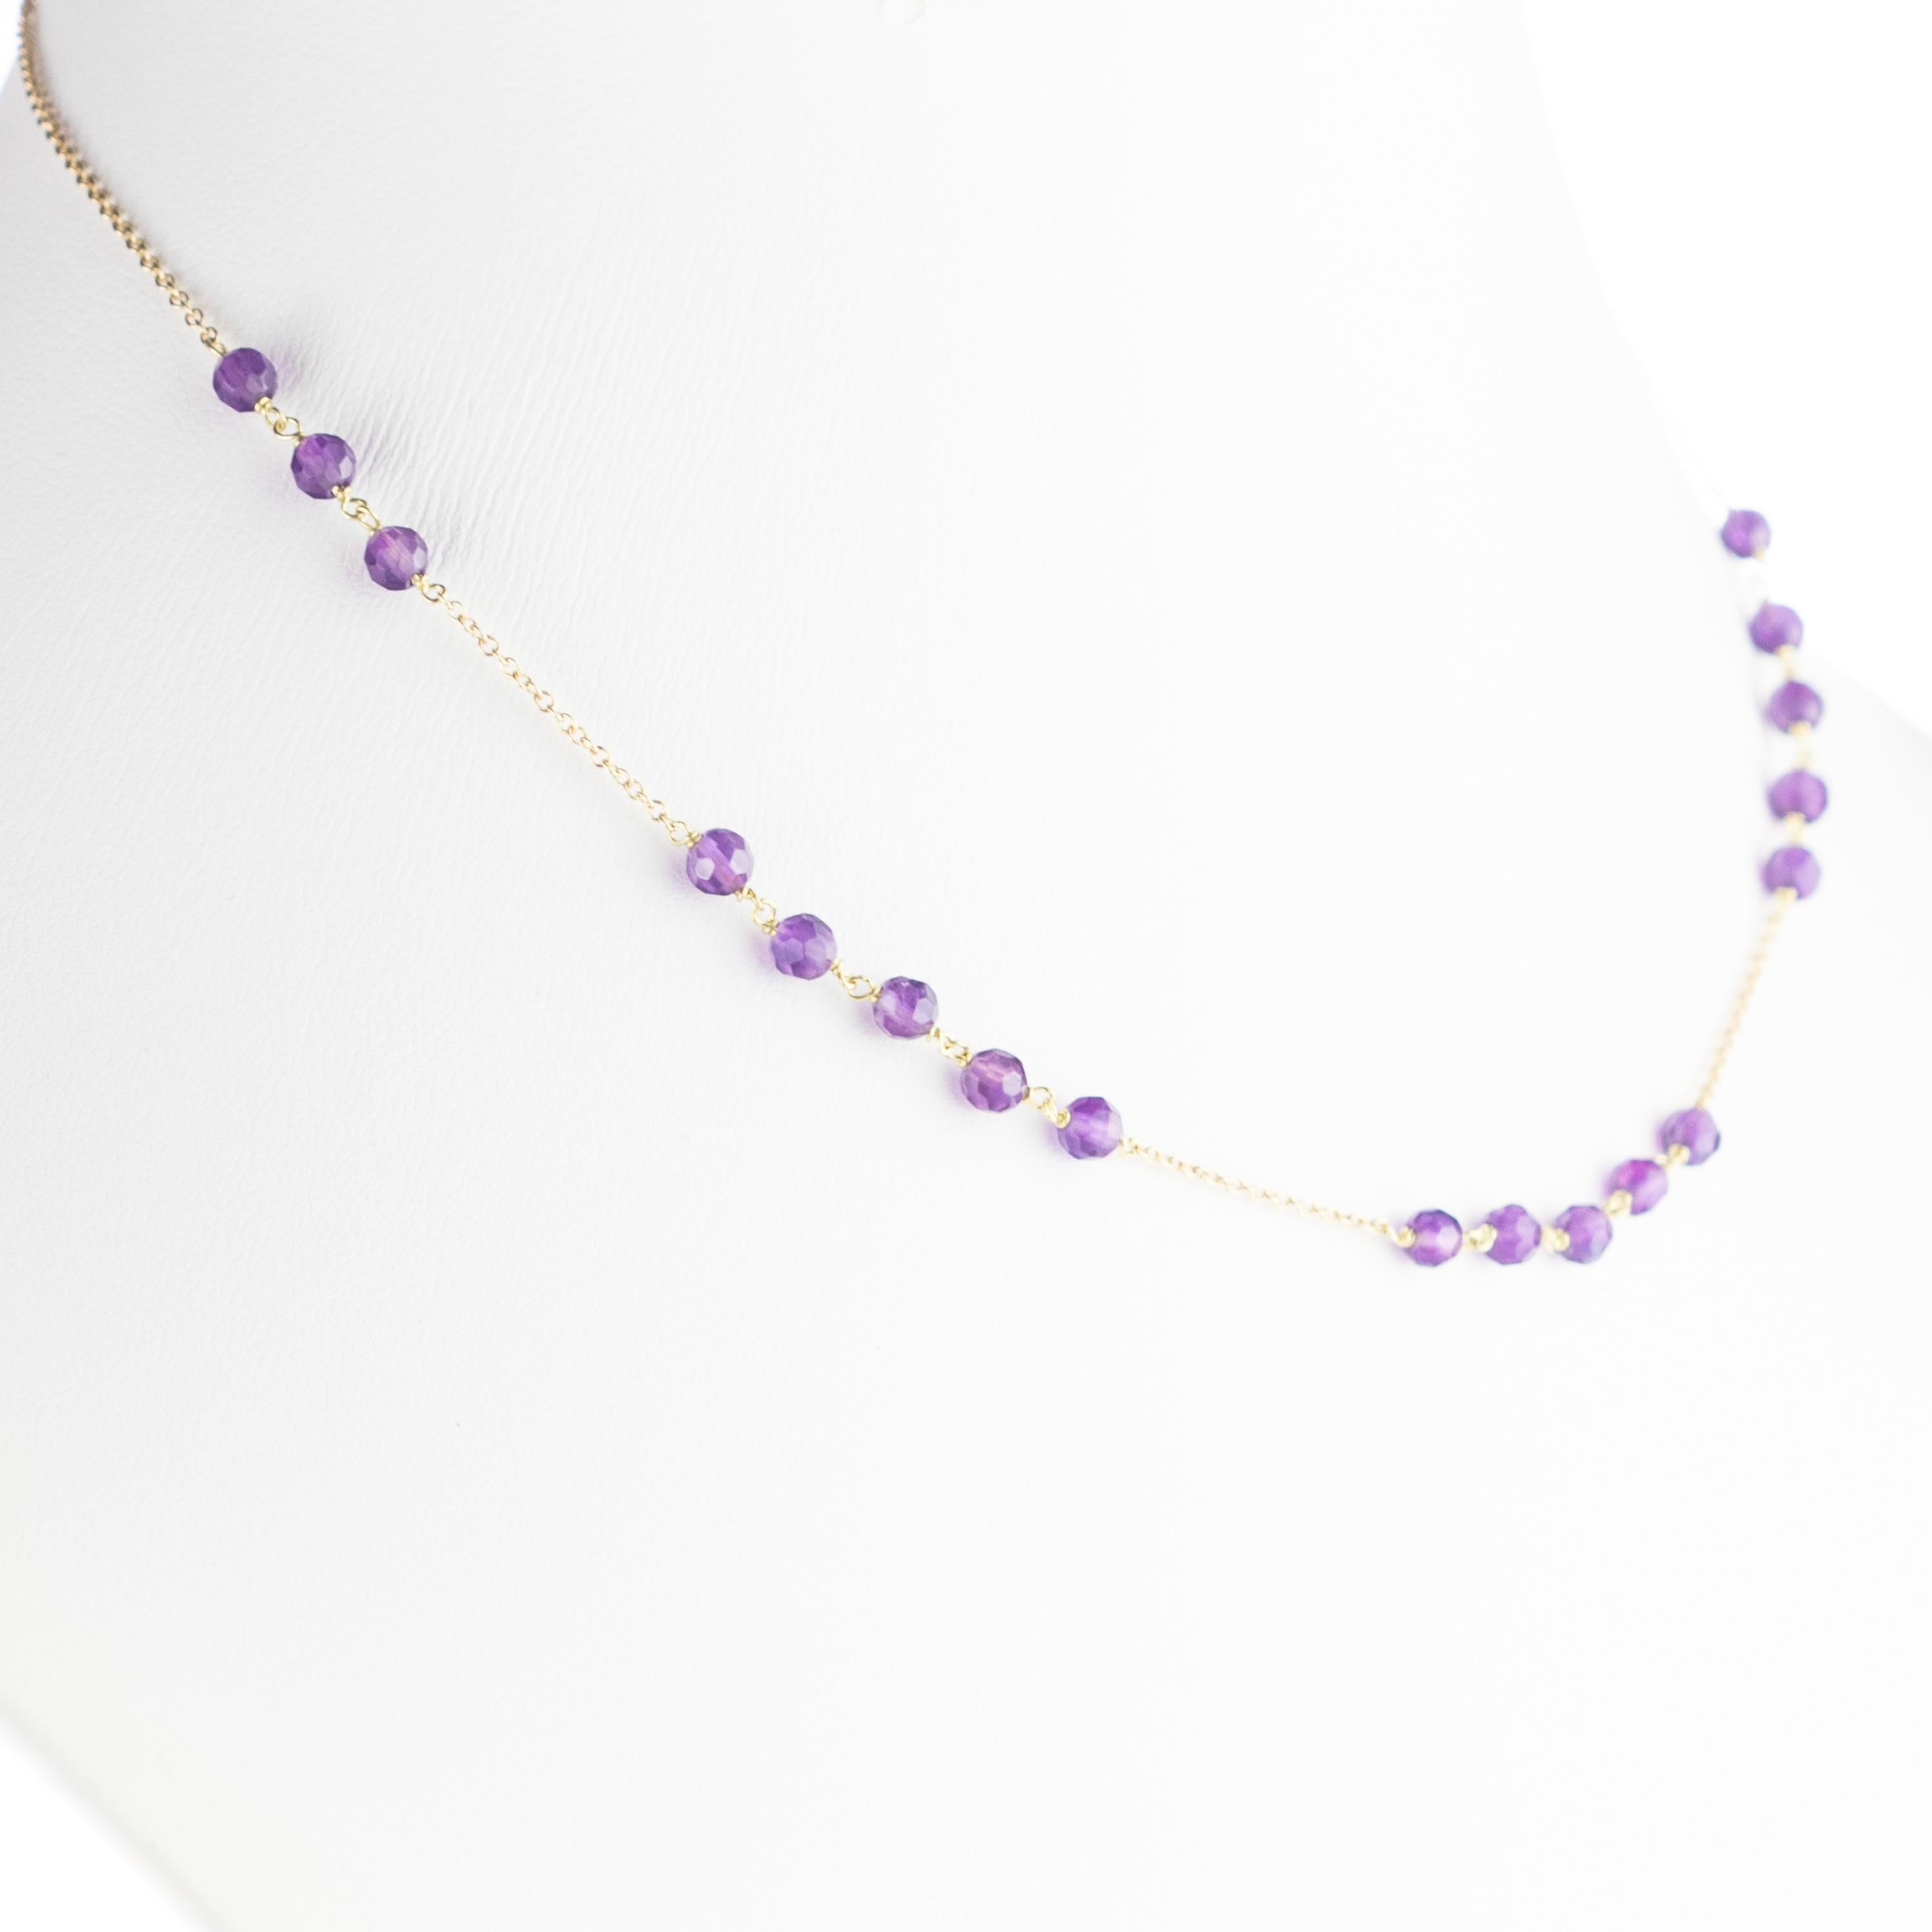 Marvellous necklace starring natural amethyst beads, for a bright charm of uniqueness. Luminous jewel with natural precious jewellery on elegant 9 karat yellow gold setting.

Amethyst is marked as the stone for the month of February. Amethyst is the